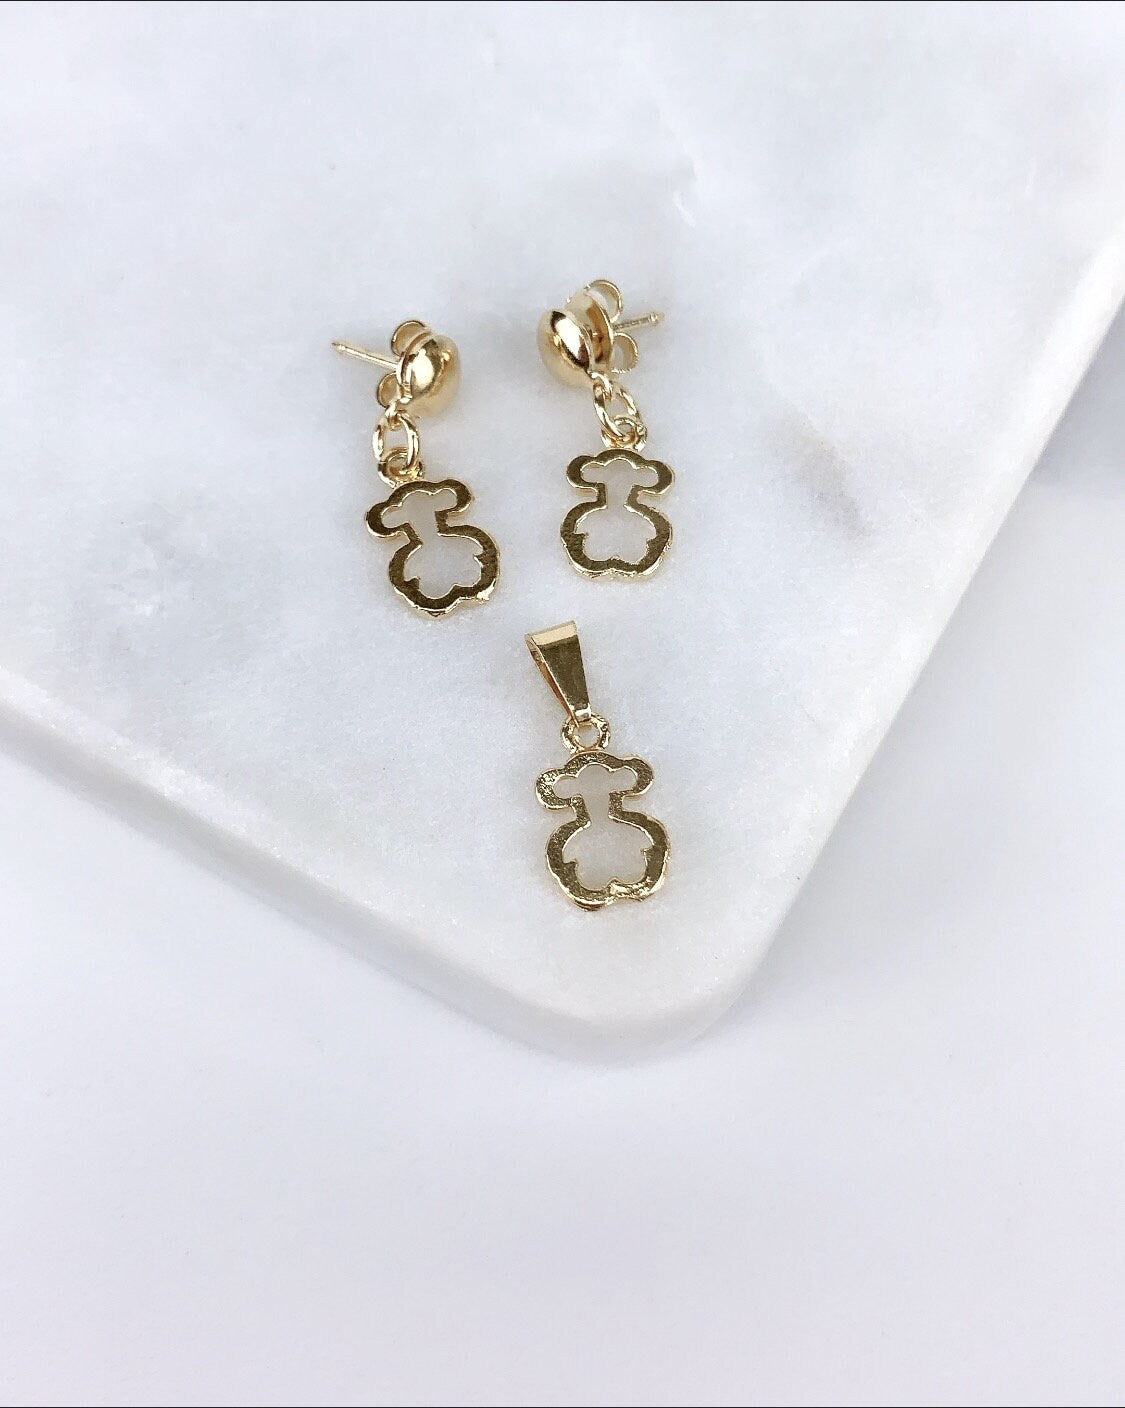 18k Gold Filled Designer Style , Bear Shape, Set of Earrings and Pendant Wholesale Jewelry Supplies